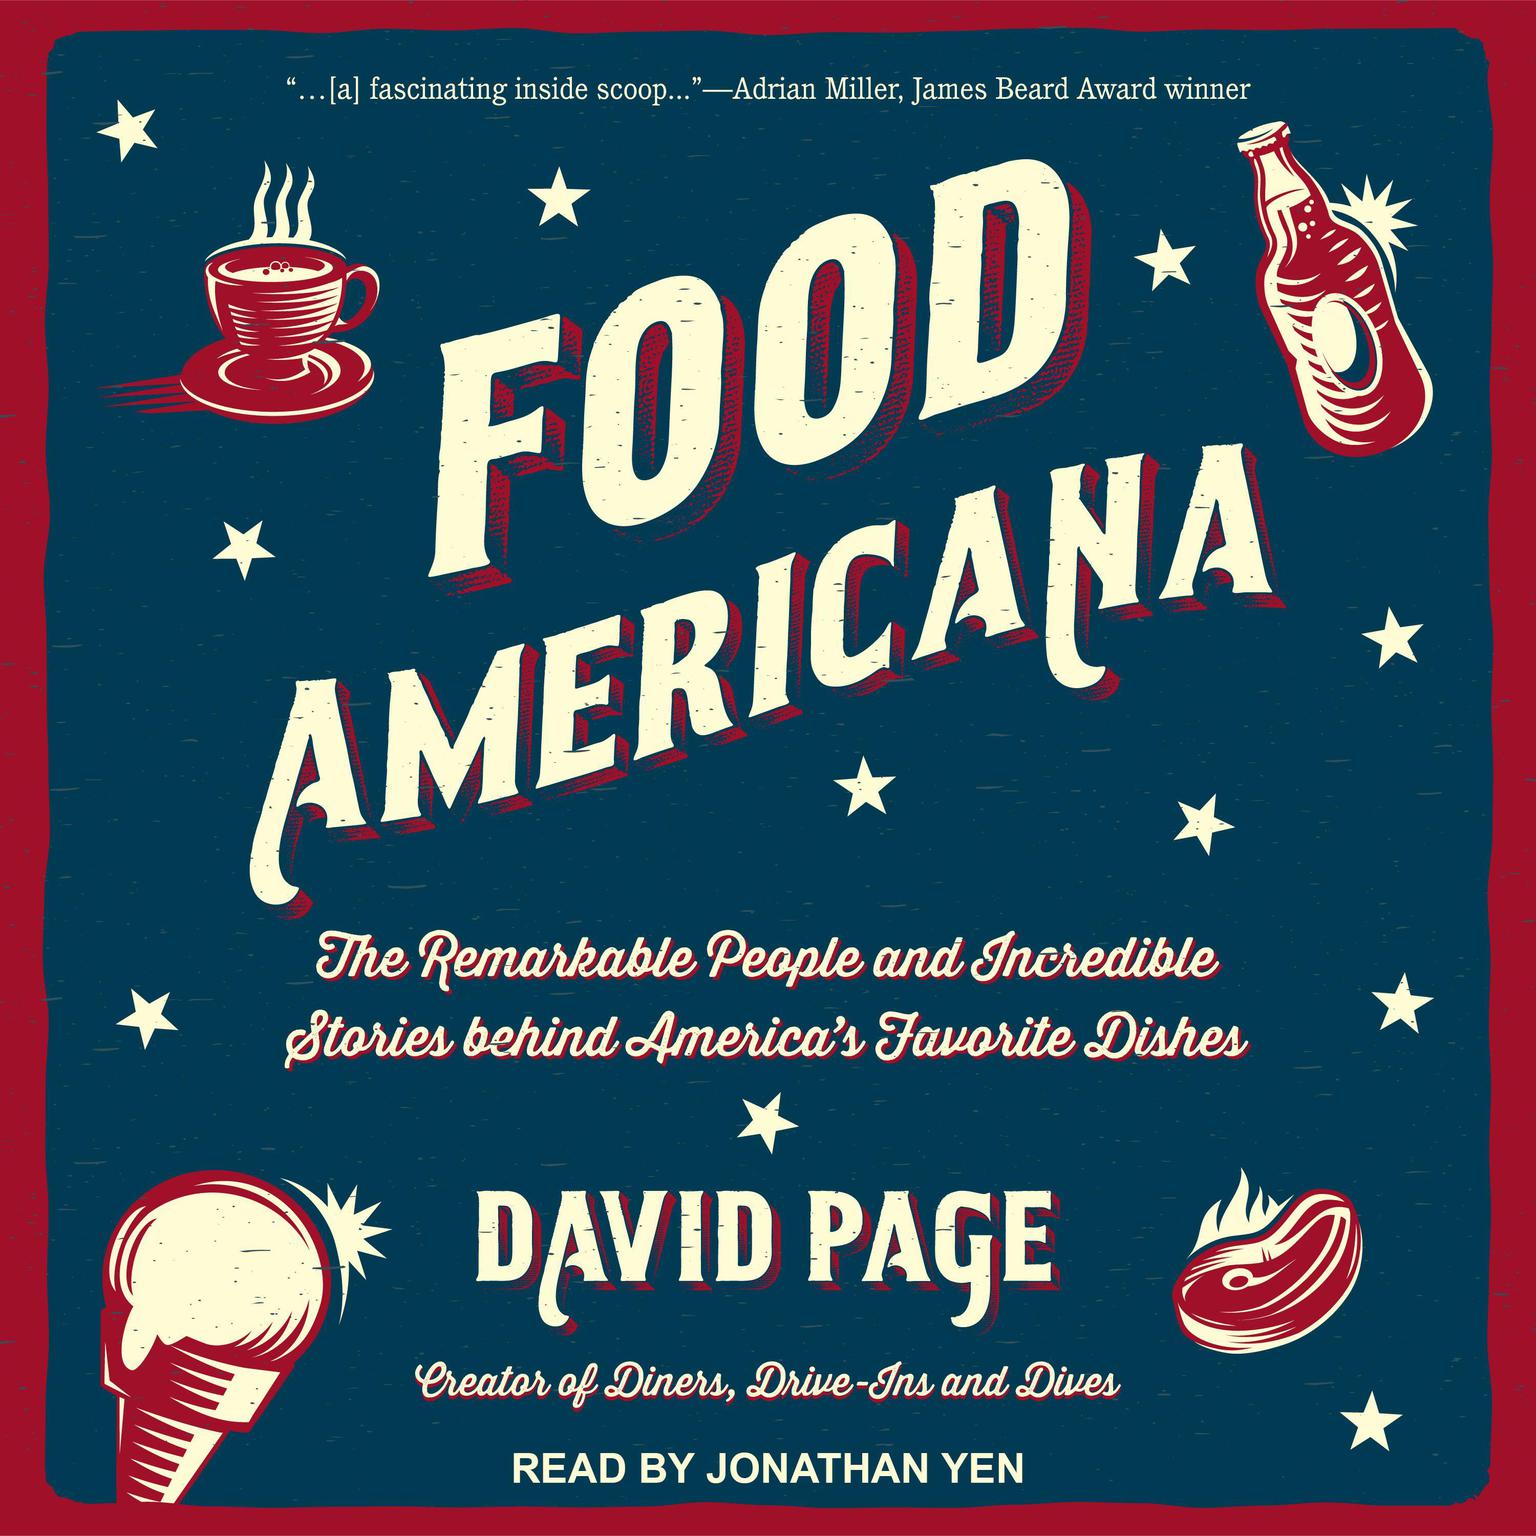 Food Americana: The Remarkable People and Incredible Stories behind Americas Favorite Dishes Audiobook, by David Page